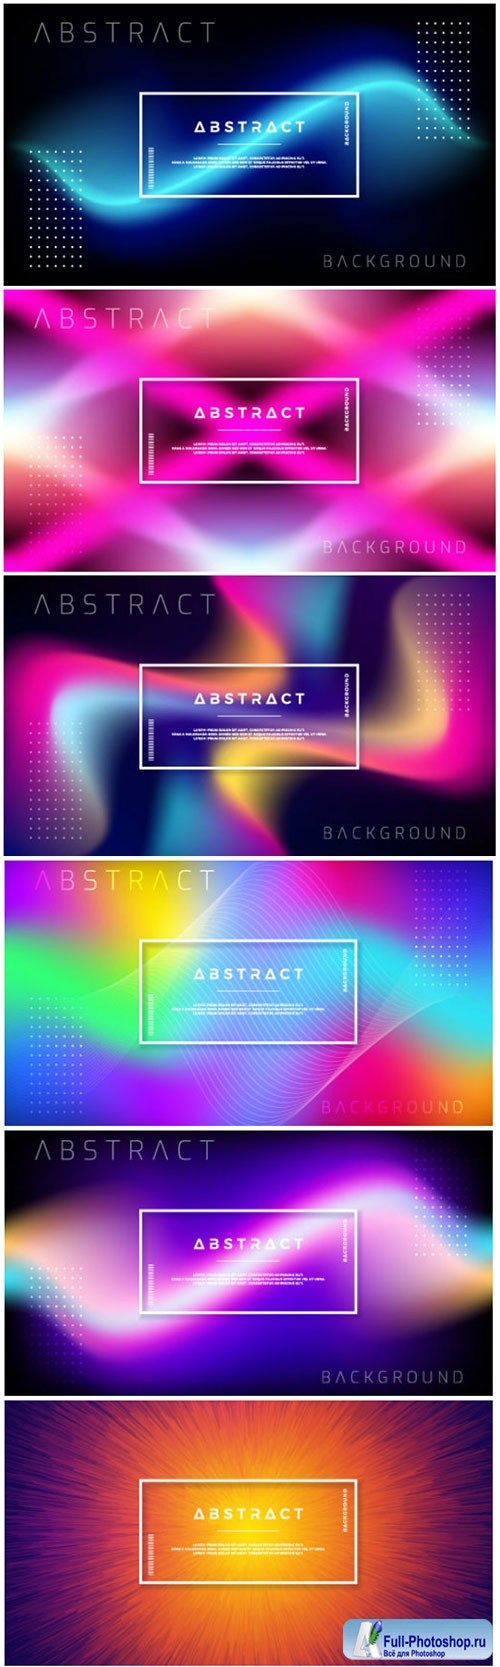 Abstract dynamic background design with colorful gradient shapes